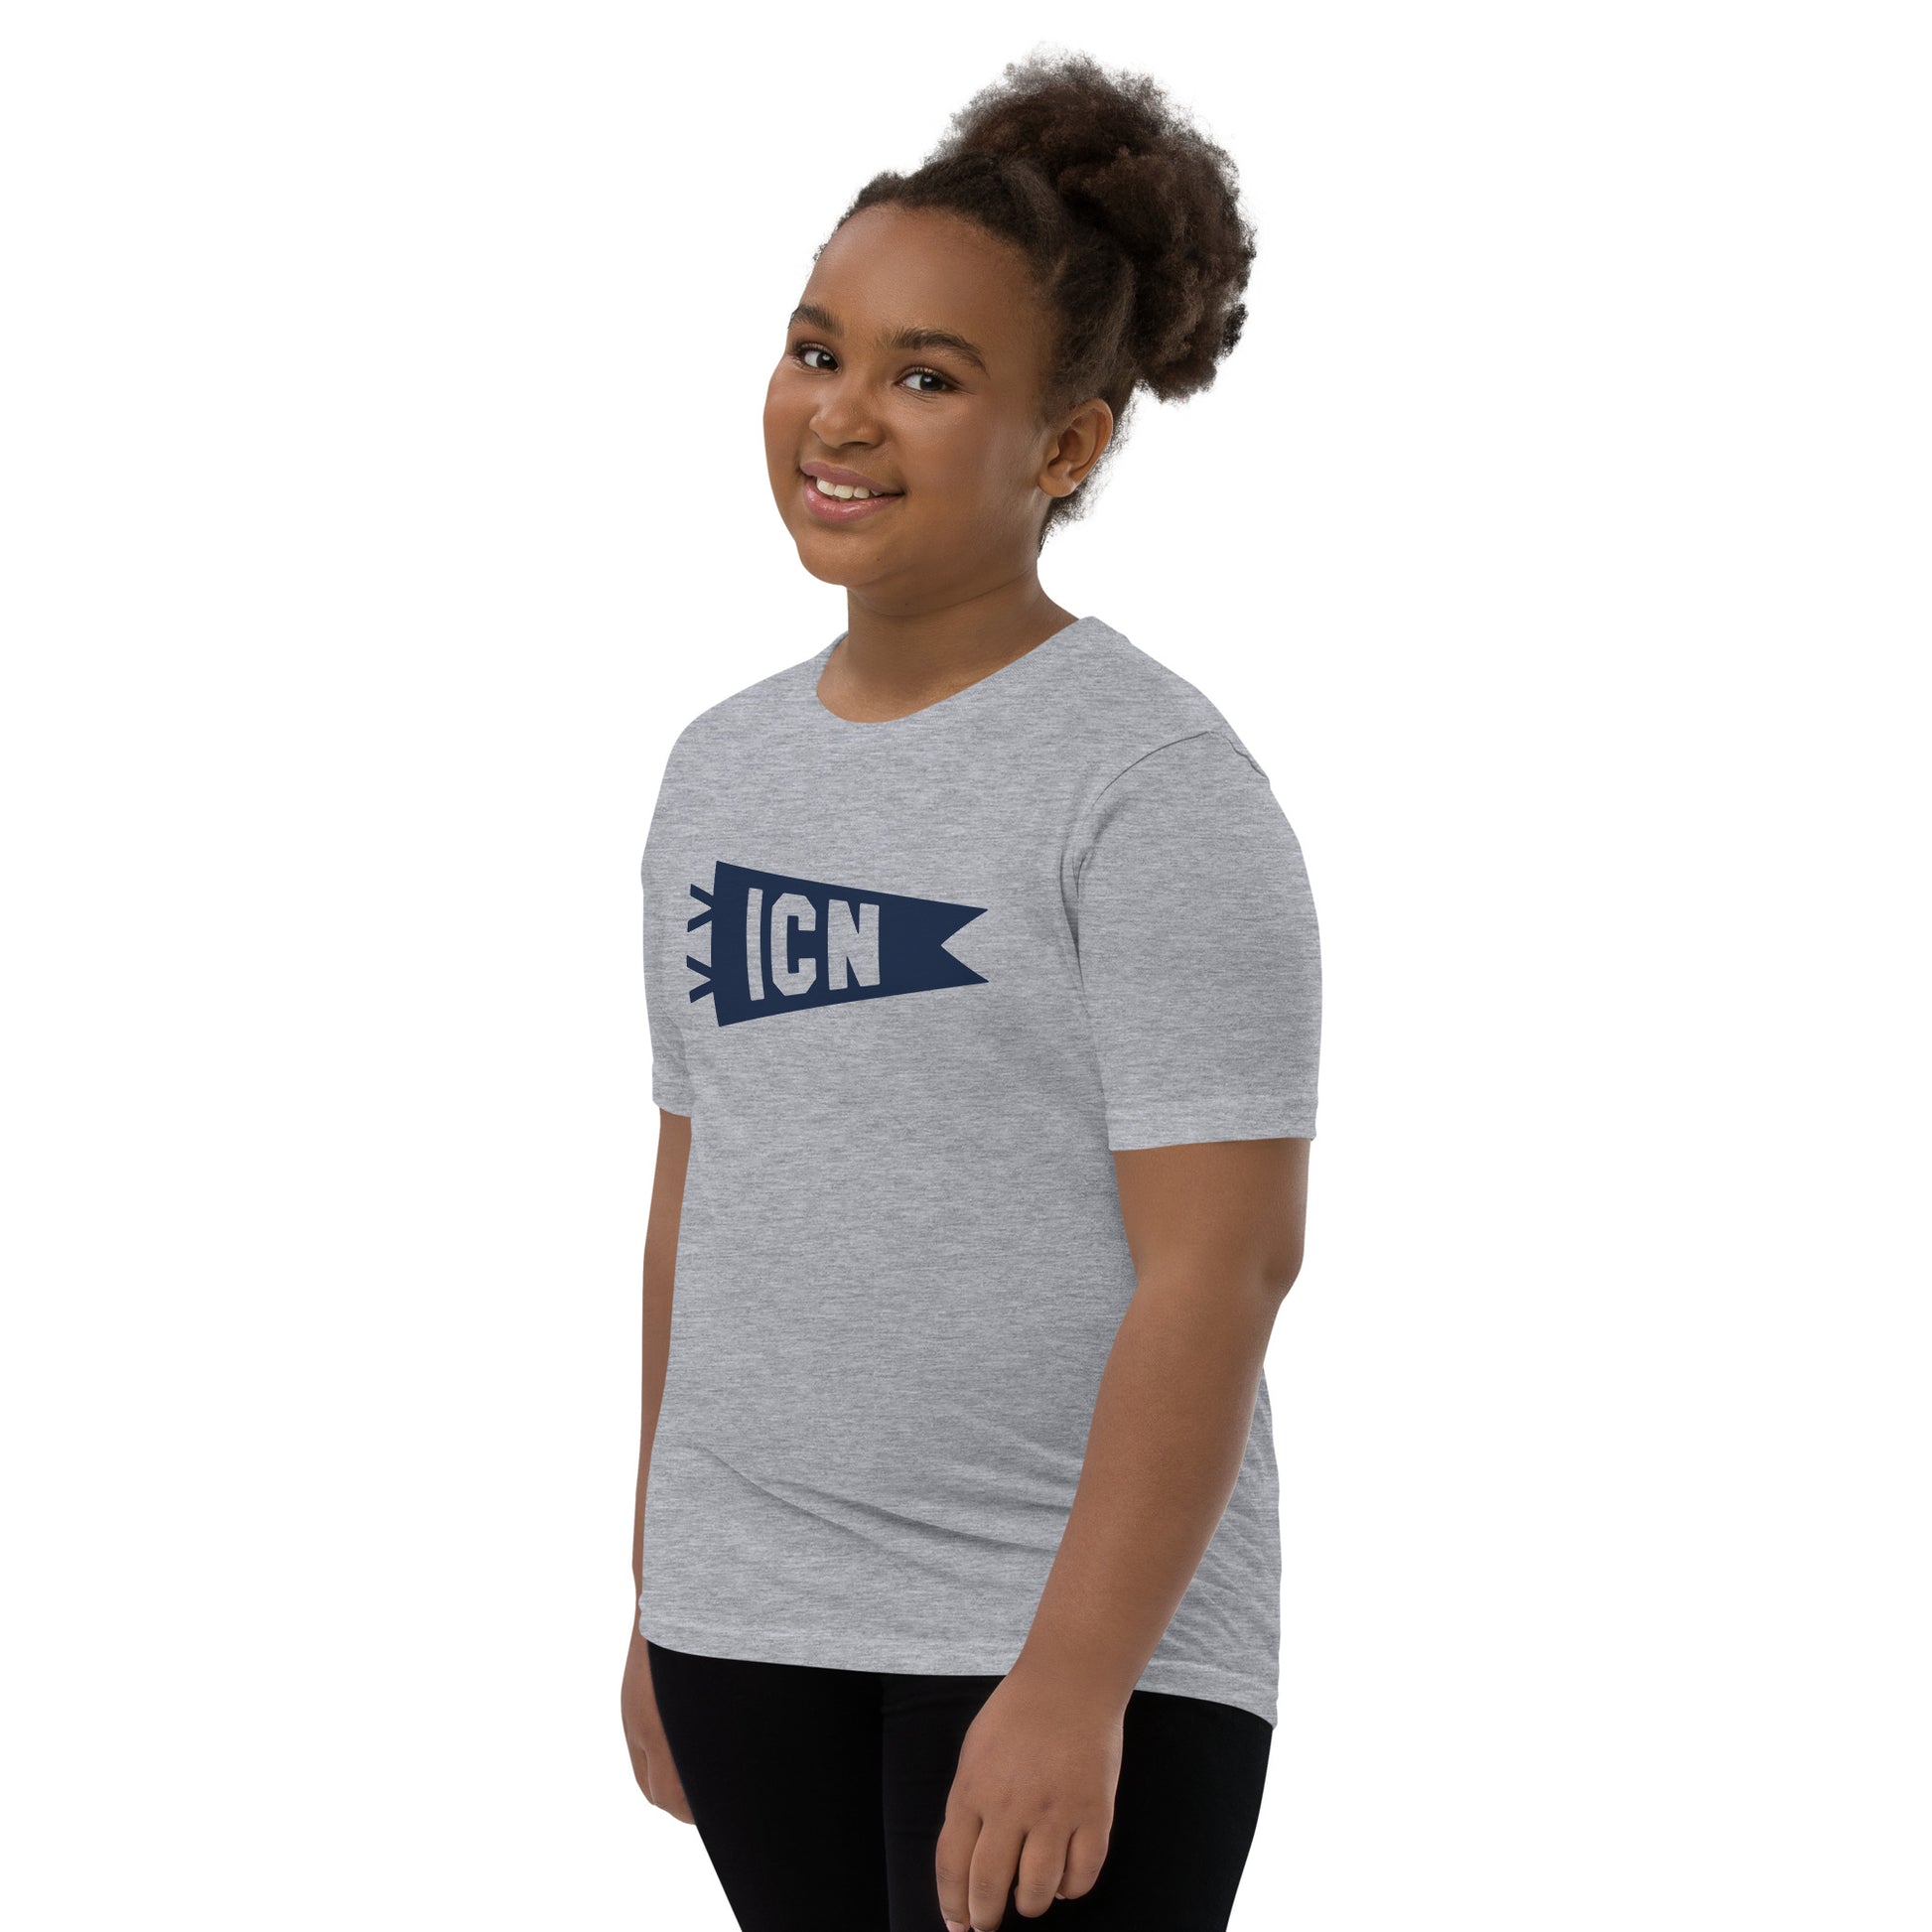 Kid's Airport Code Tee - Navy Blue Graphic • ICN Seoul • YHM Designs - Image 04